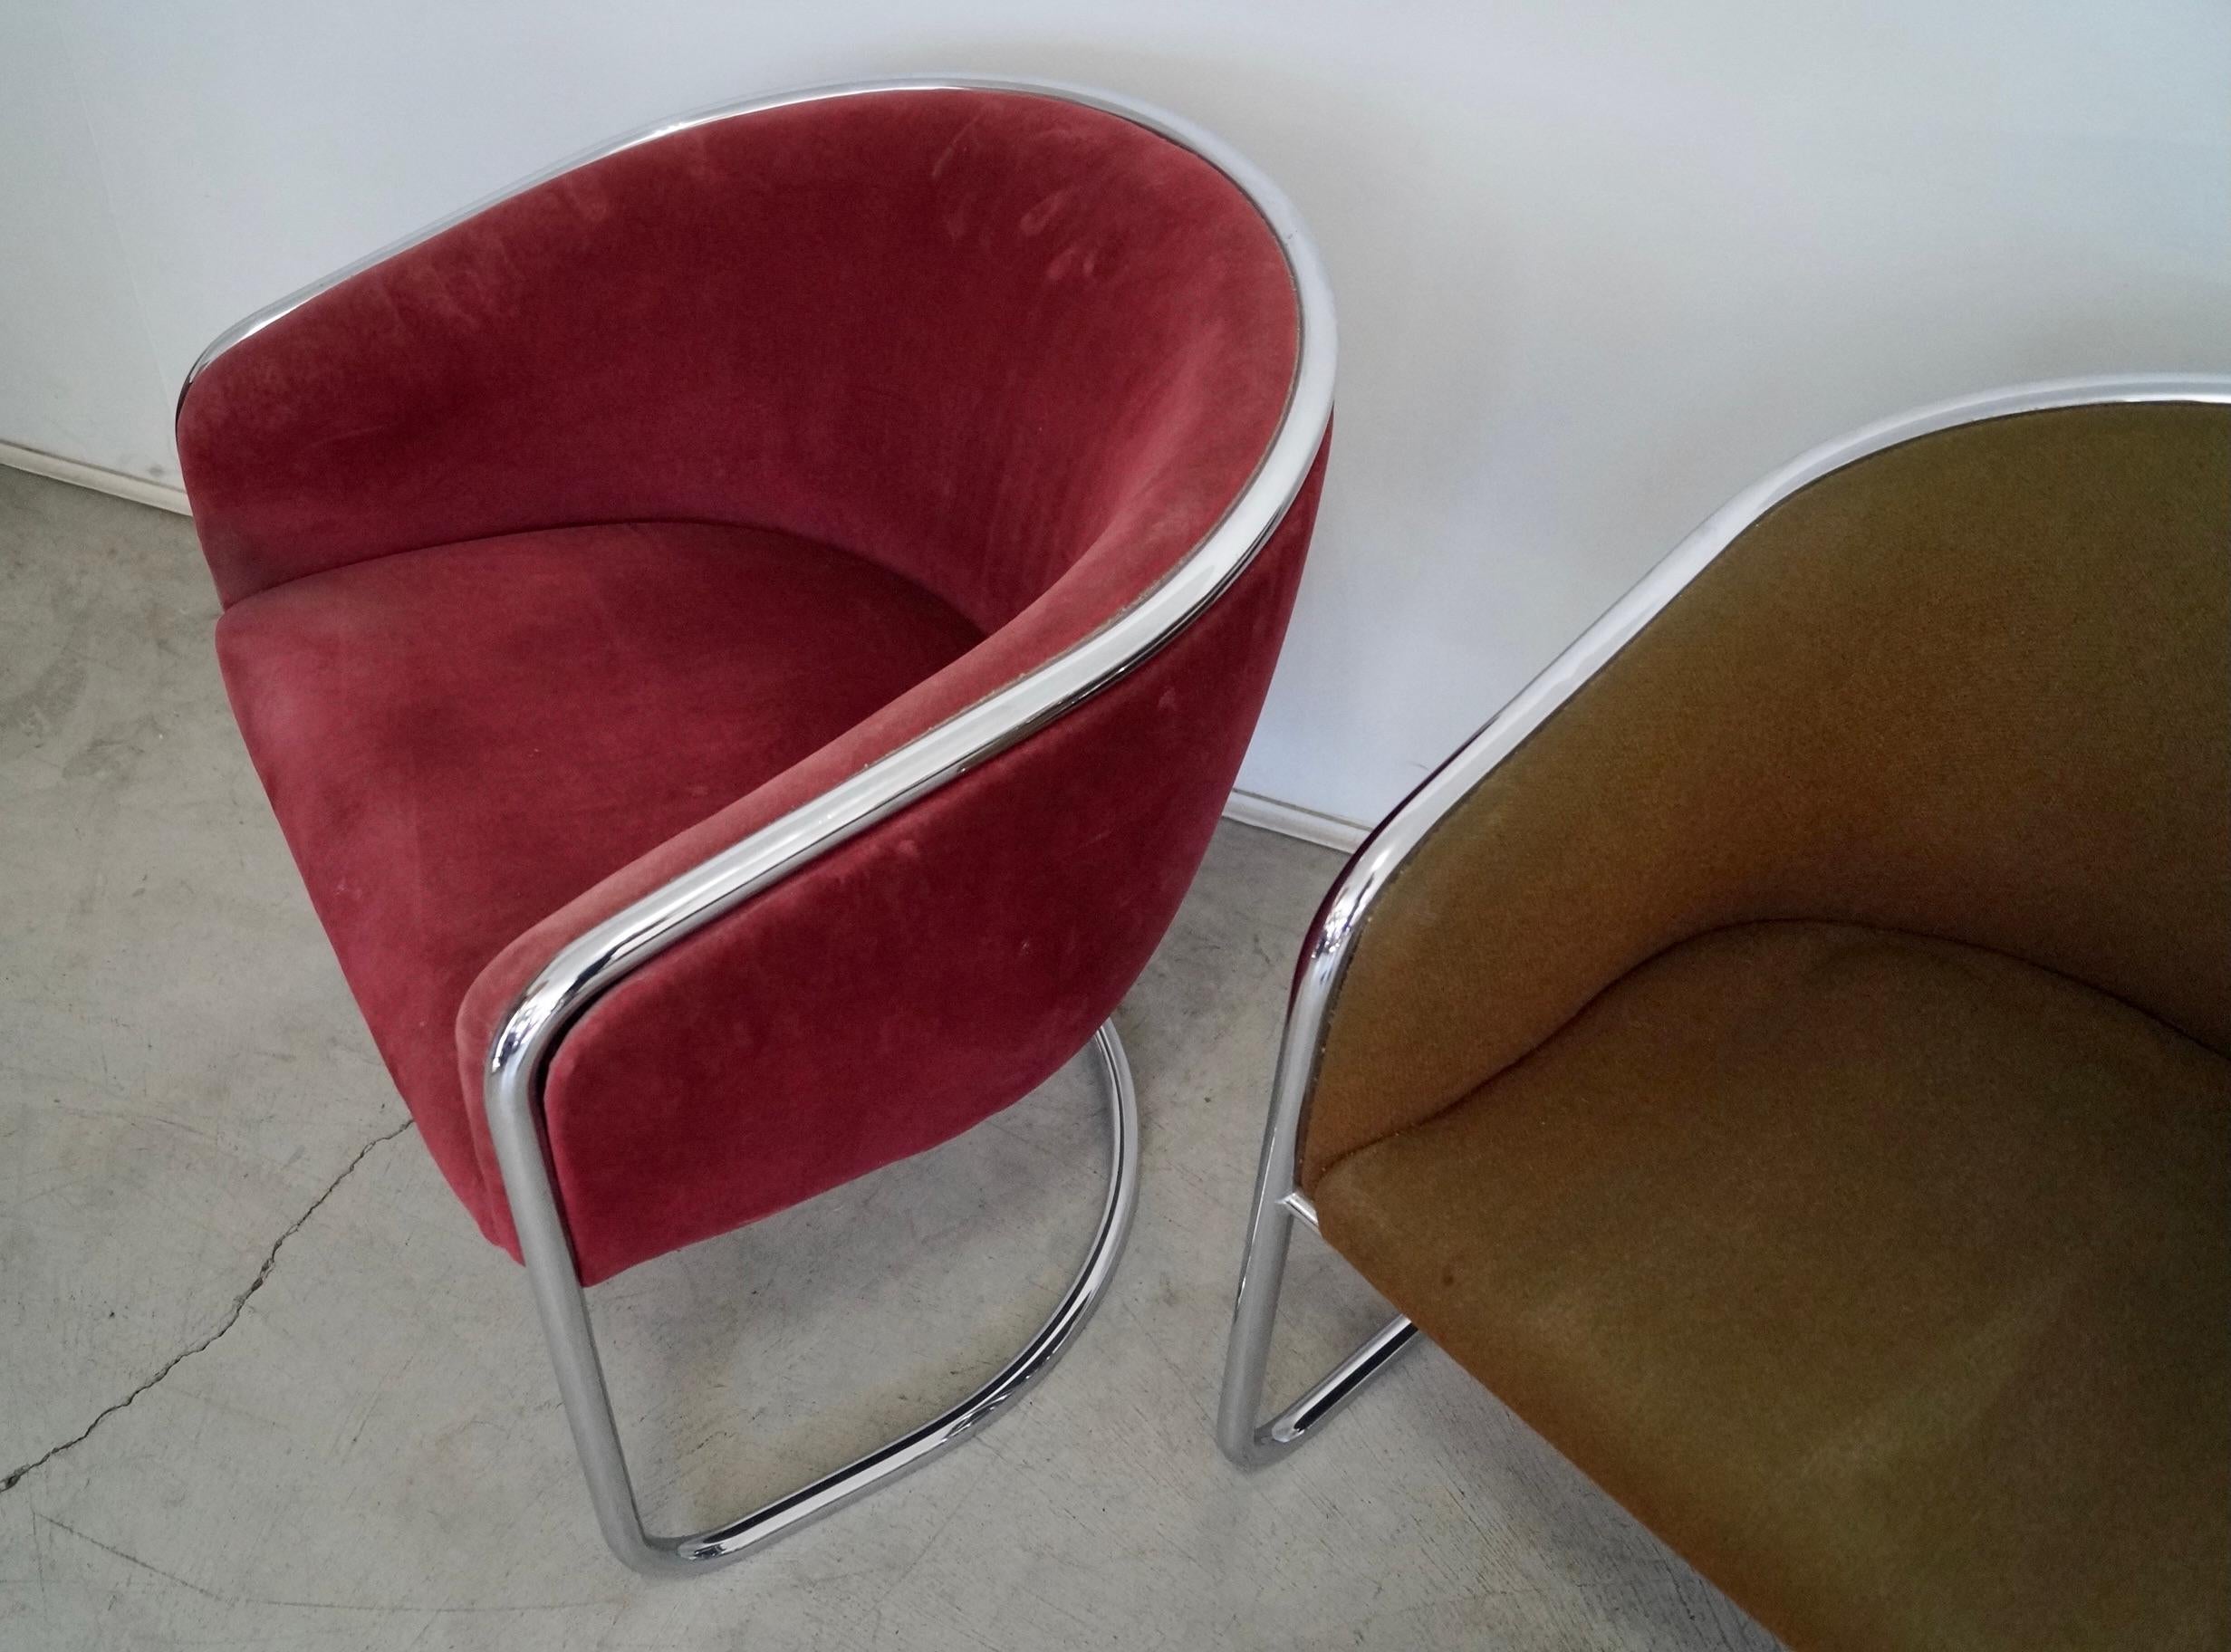 1970's Mid-Century Modern Thonet Chrome Armchairs - Set of Four For Sale 12